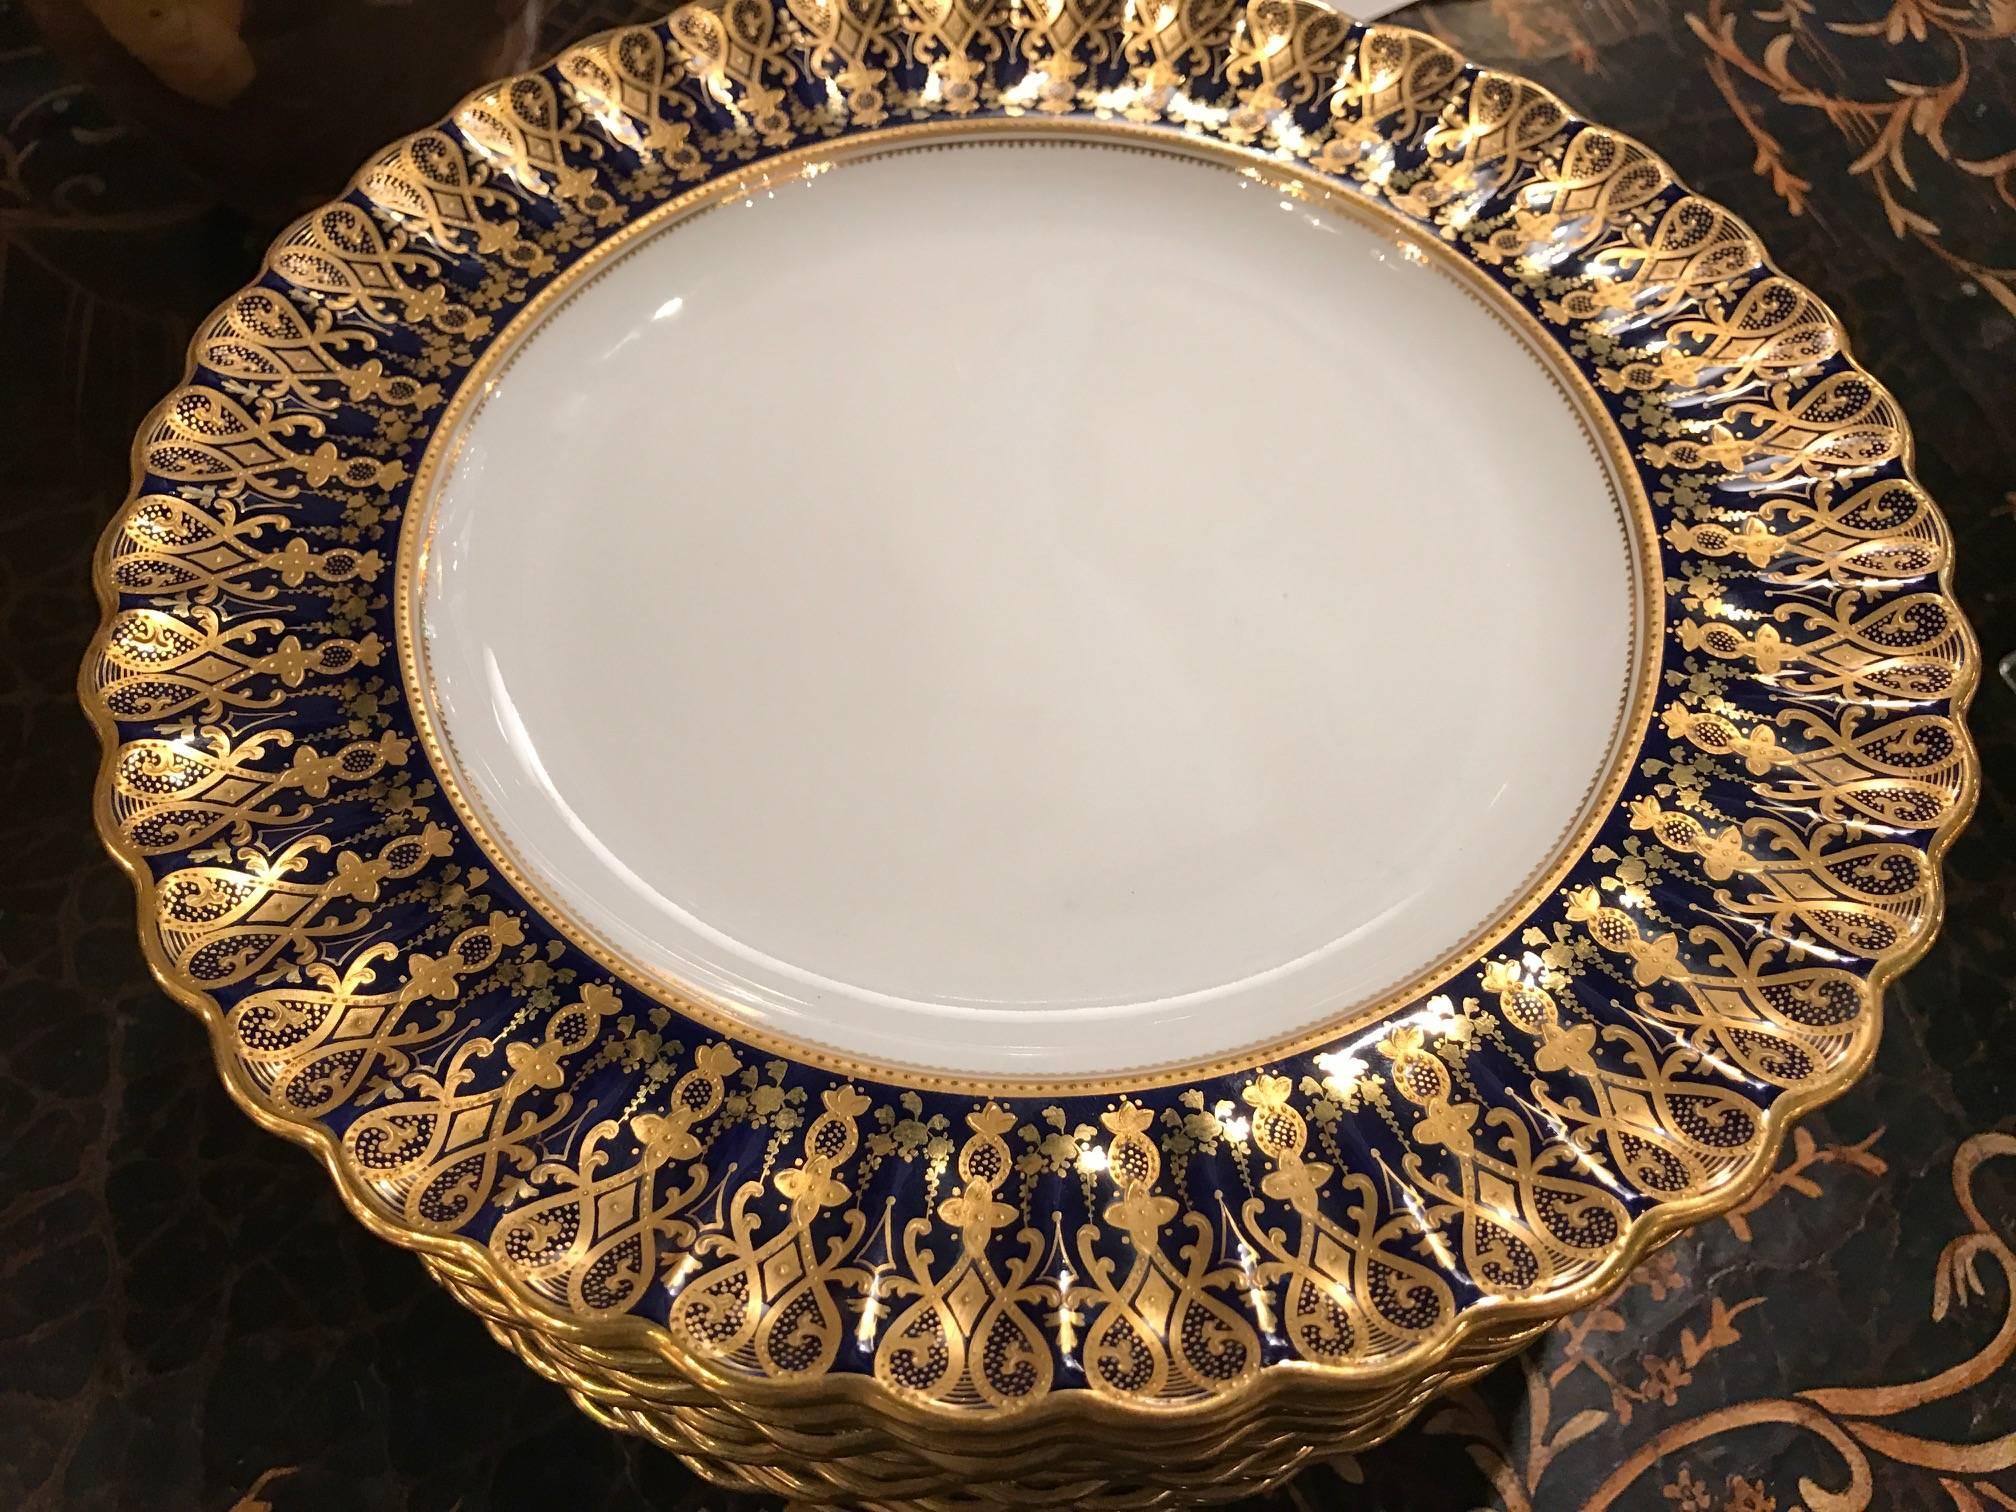 Set of 12 19th Century English Hand Gilt and Cobalt Plates by Copeland 3